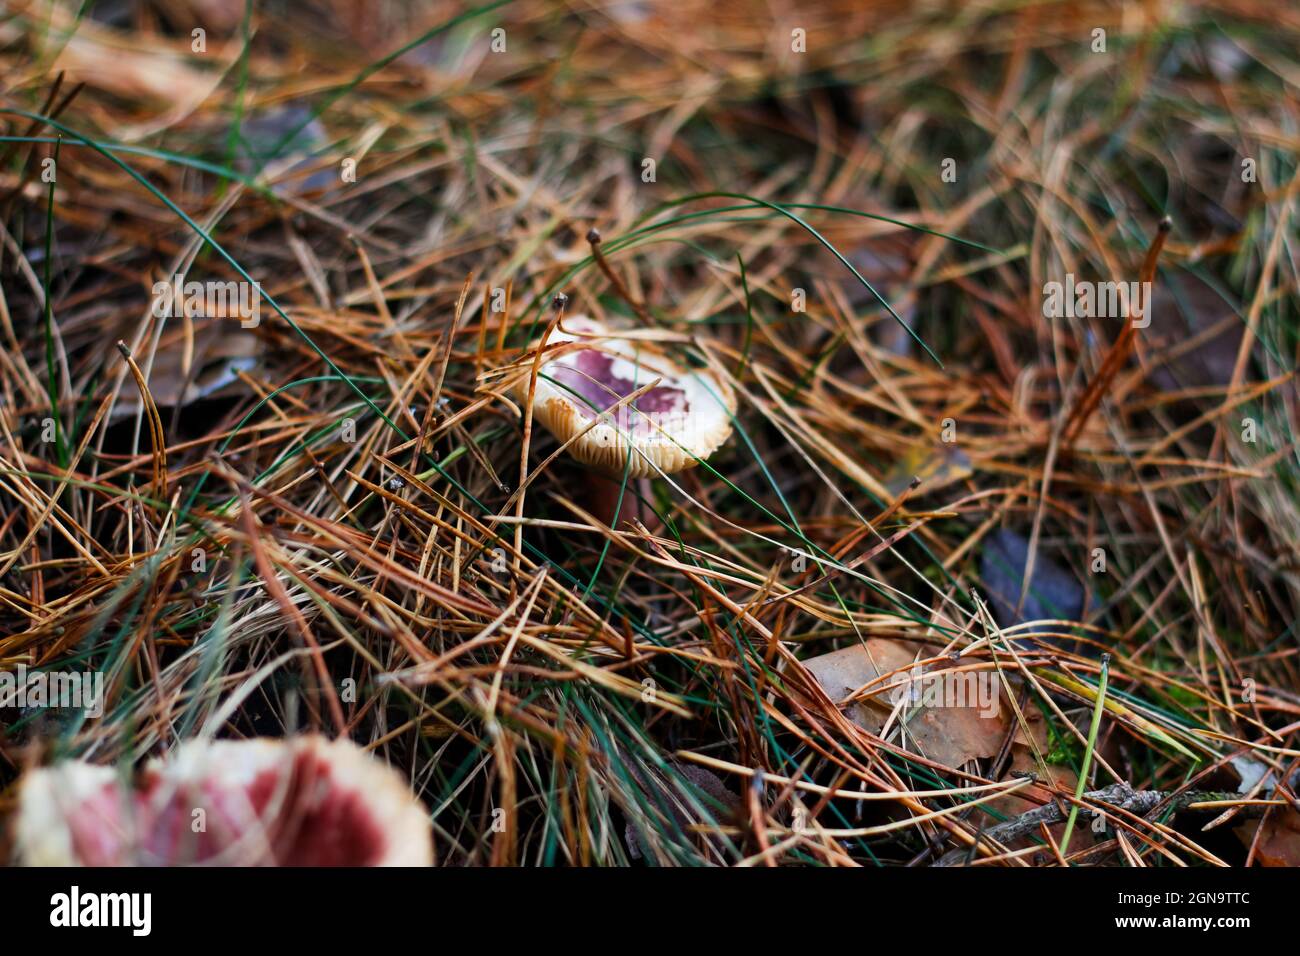 Defocus red russula mushroom among dry grass, leaves and needles. Edible mushroom growing in the green forest. Boletus hiding in ground. Side view Stock Photo